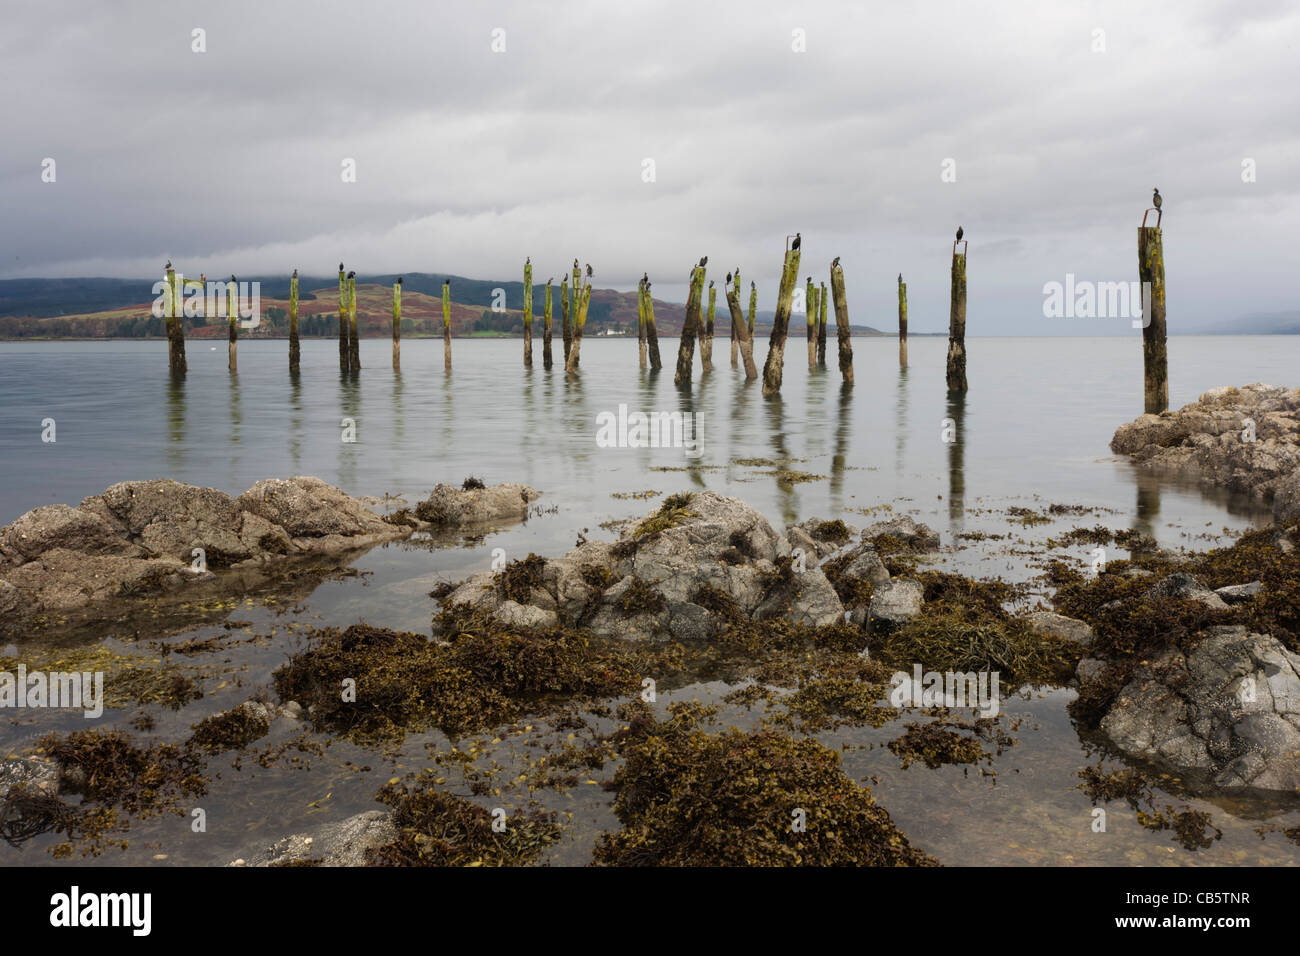 Gannets gather on disused wooden piles at old Salen Pier, Salen, Isle of Mull, Scotland. Stock Photo